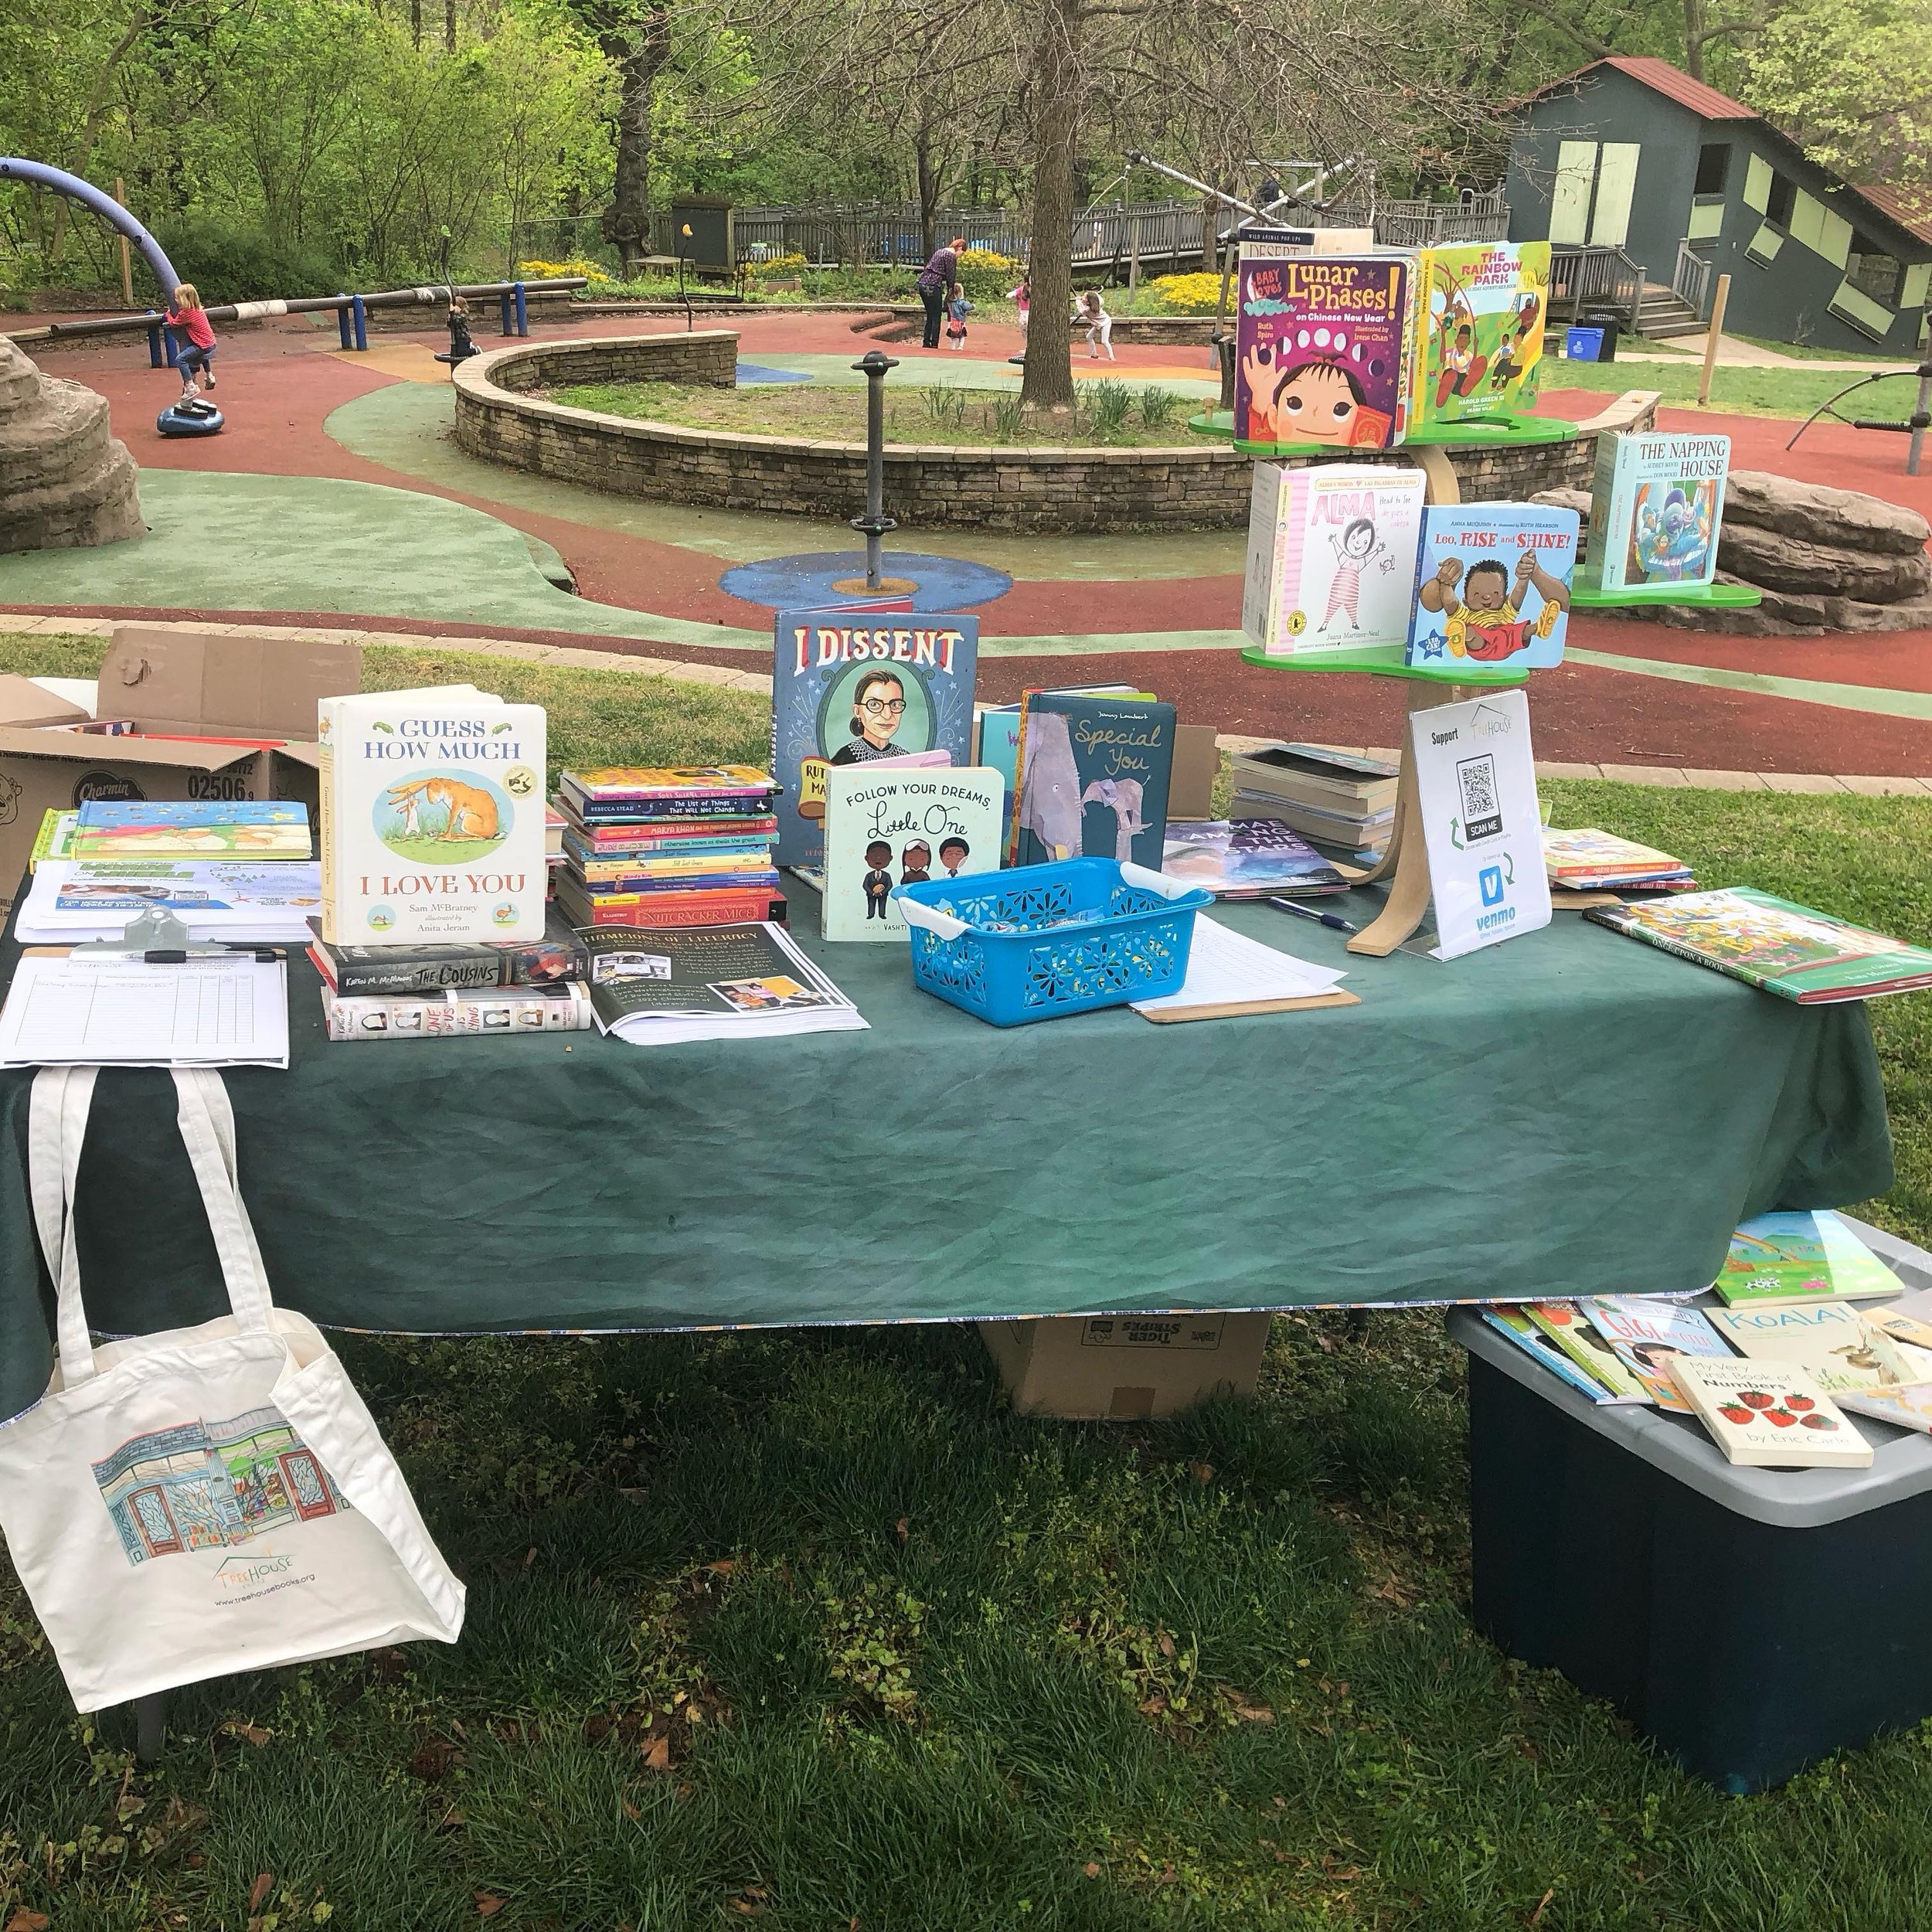 Thanks @whyy for having us out to @smithplayground today for Be My Neighbor Day! We loved talking with everyone and sharing free books for all!

 #bemyneighbor #bemyneighborday